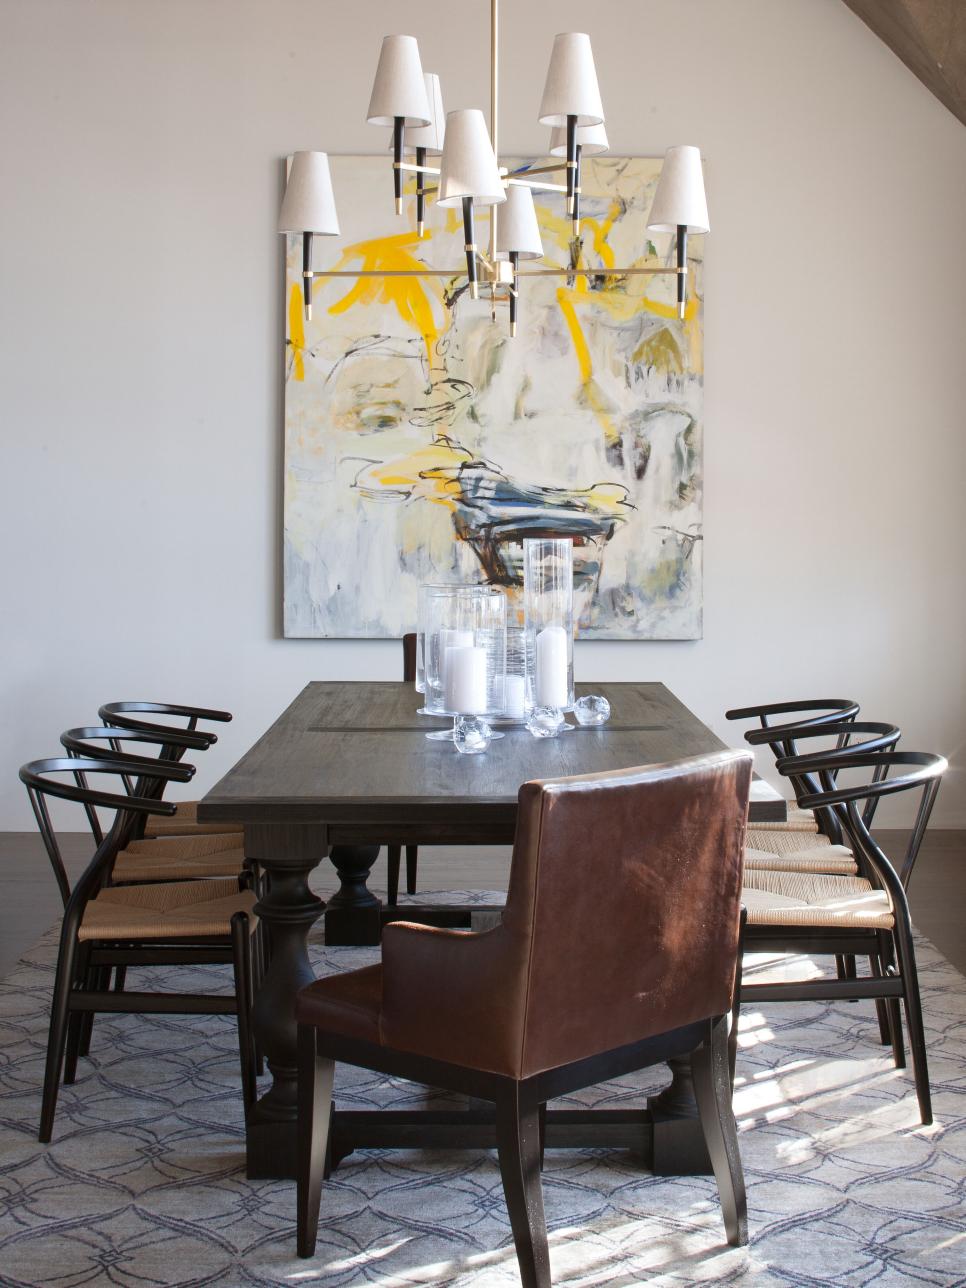 Eclectic Dining Room With Modern Art Wall Hanging | HGTV